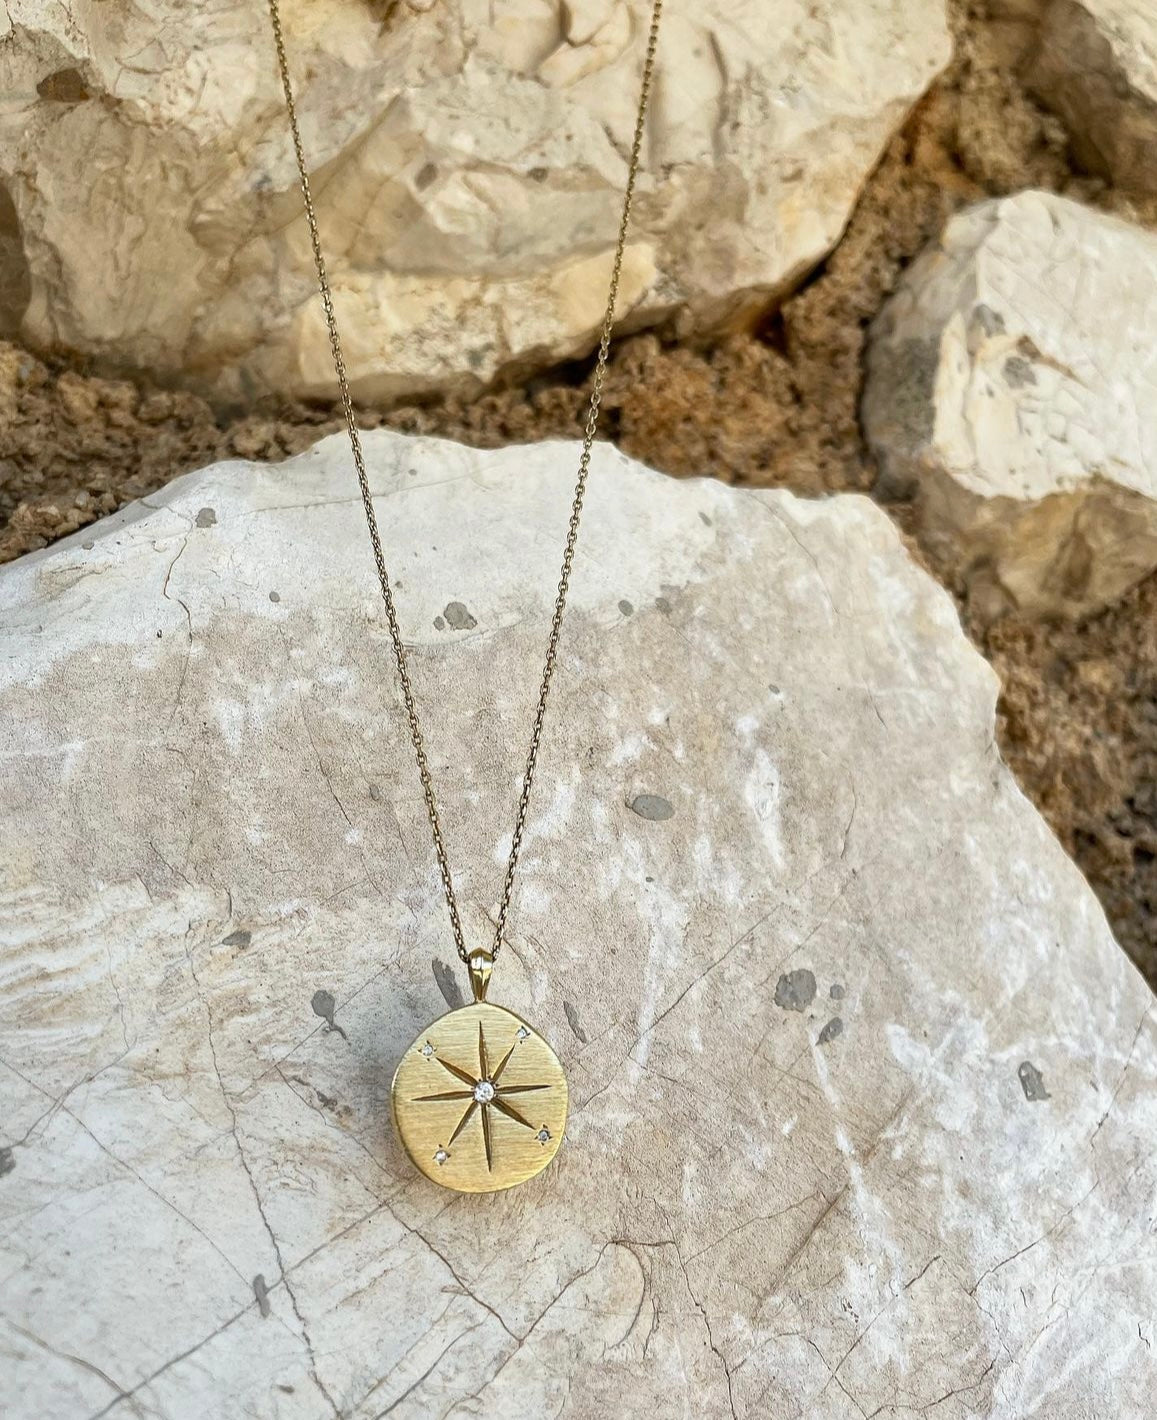 gold plated sun medallion necklace by hanka in